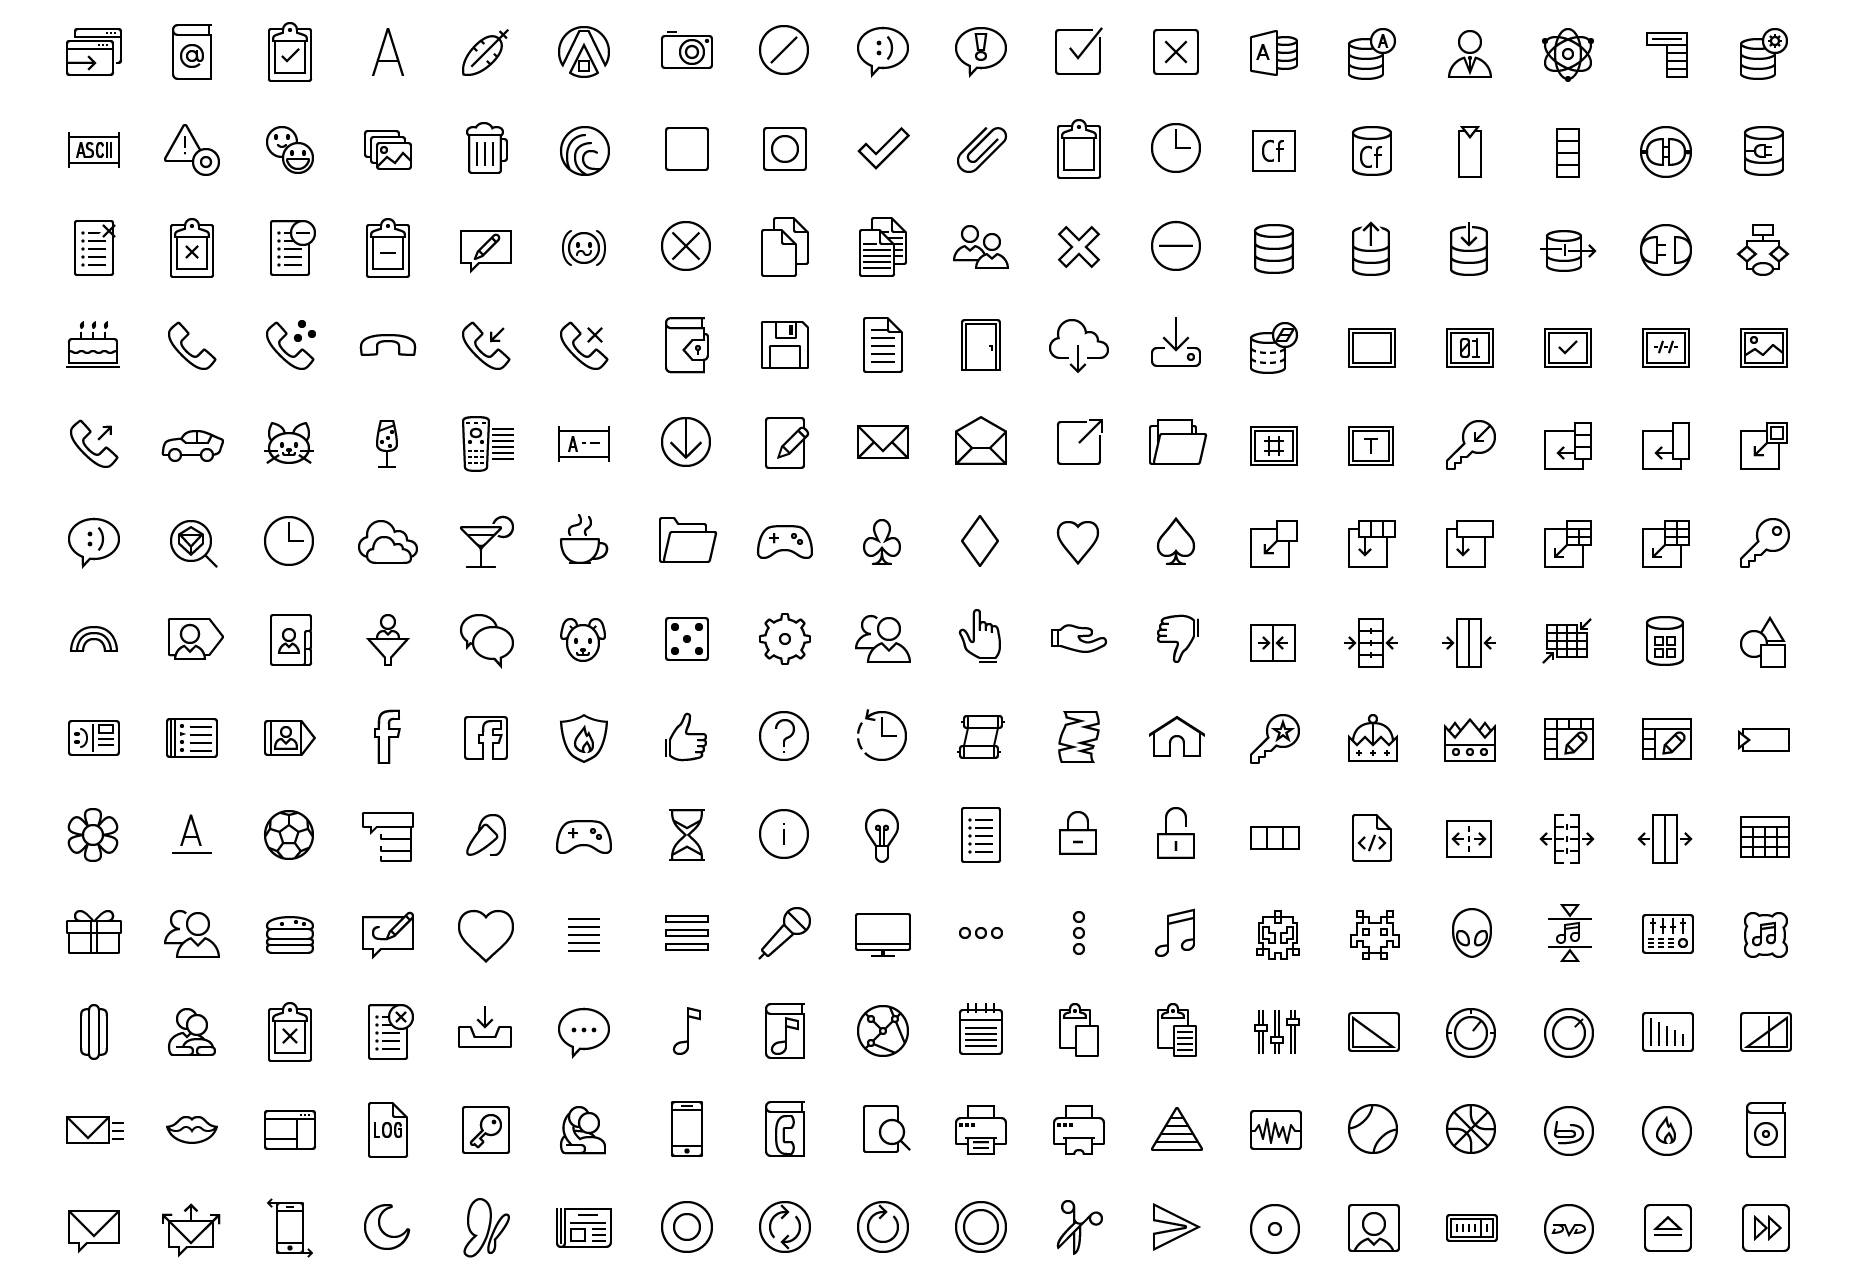 Outline & Filled Vector Icons Collection 